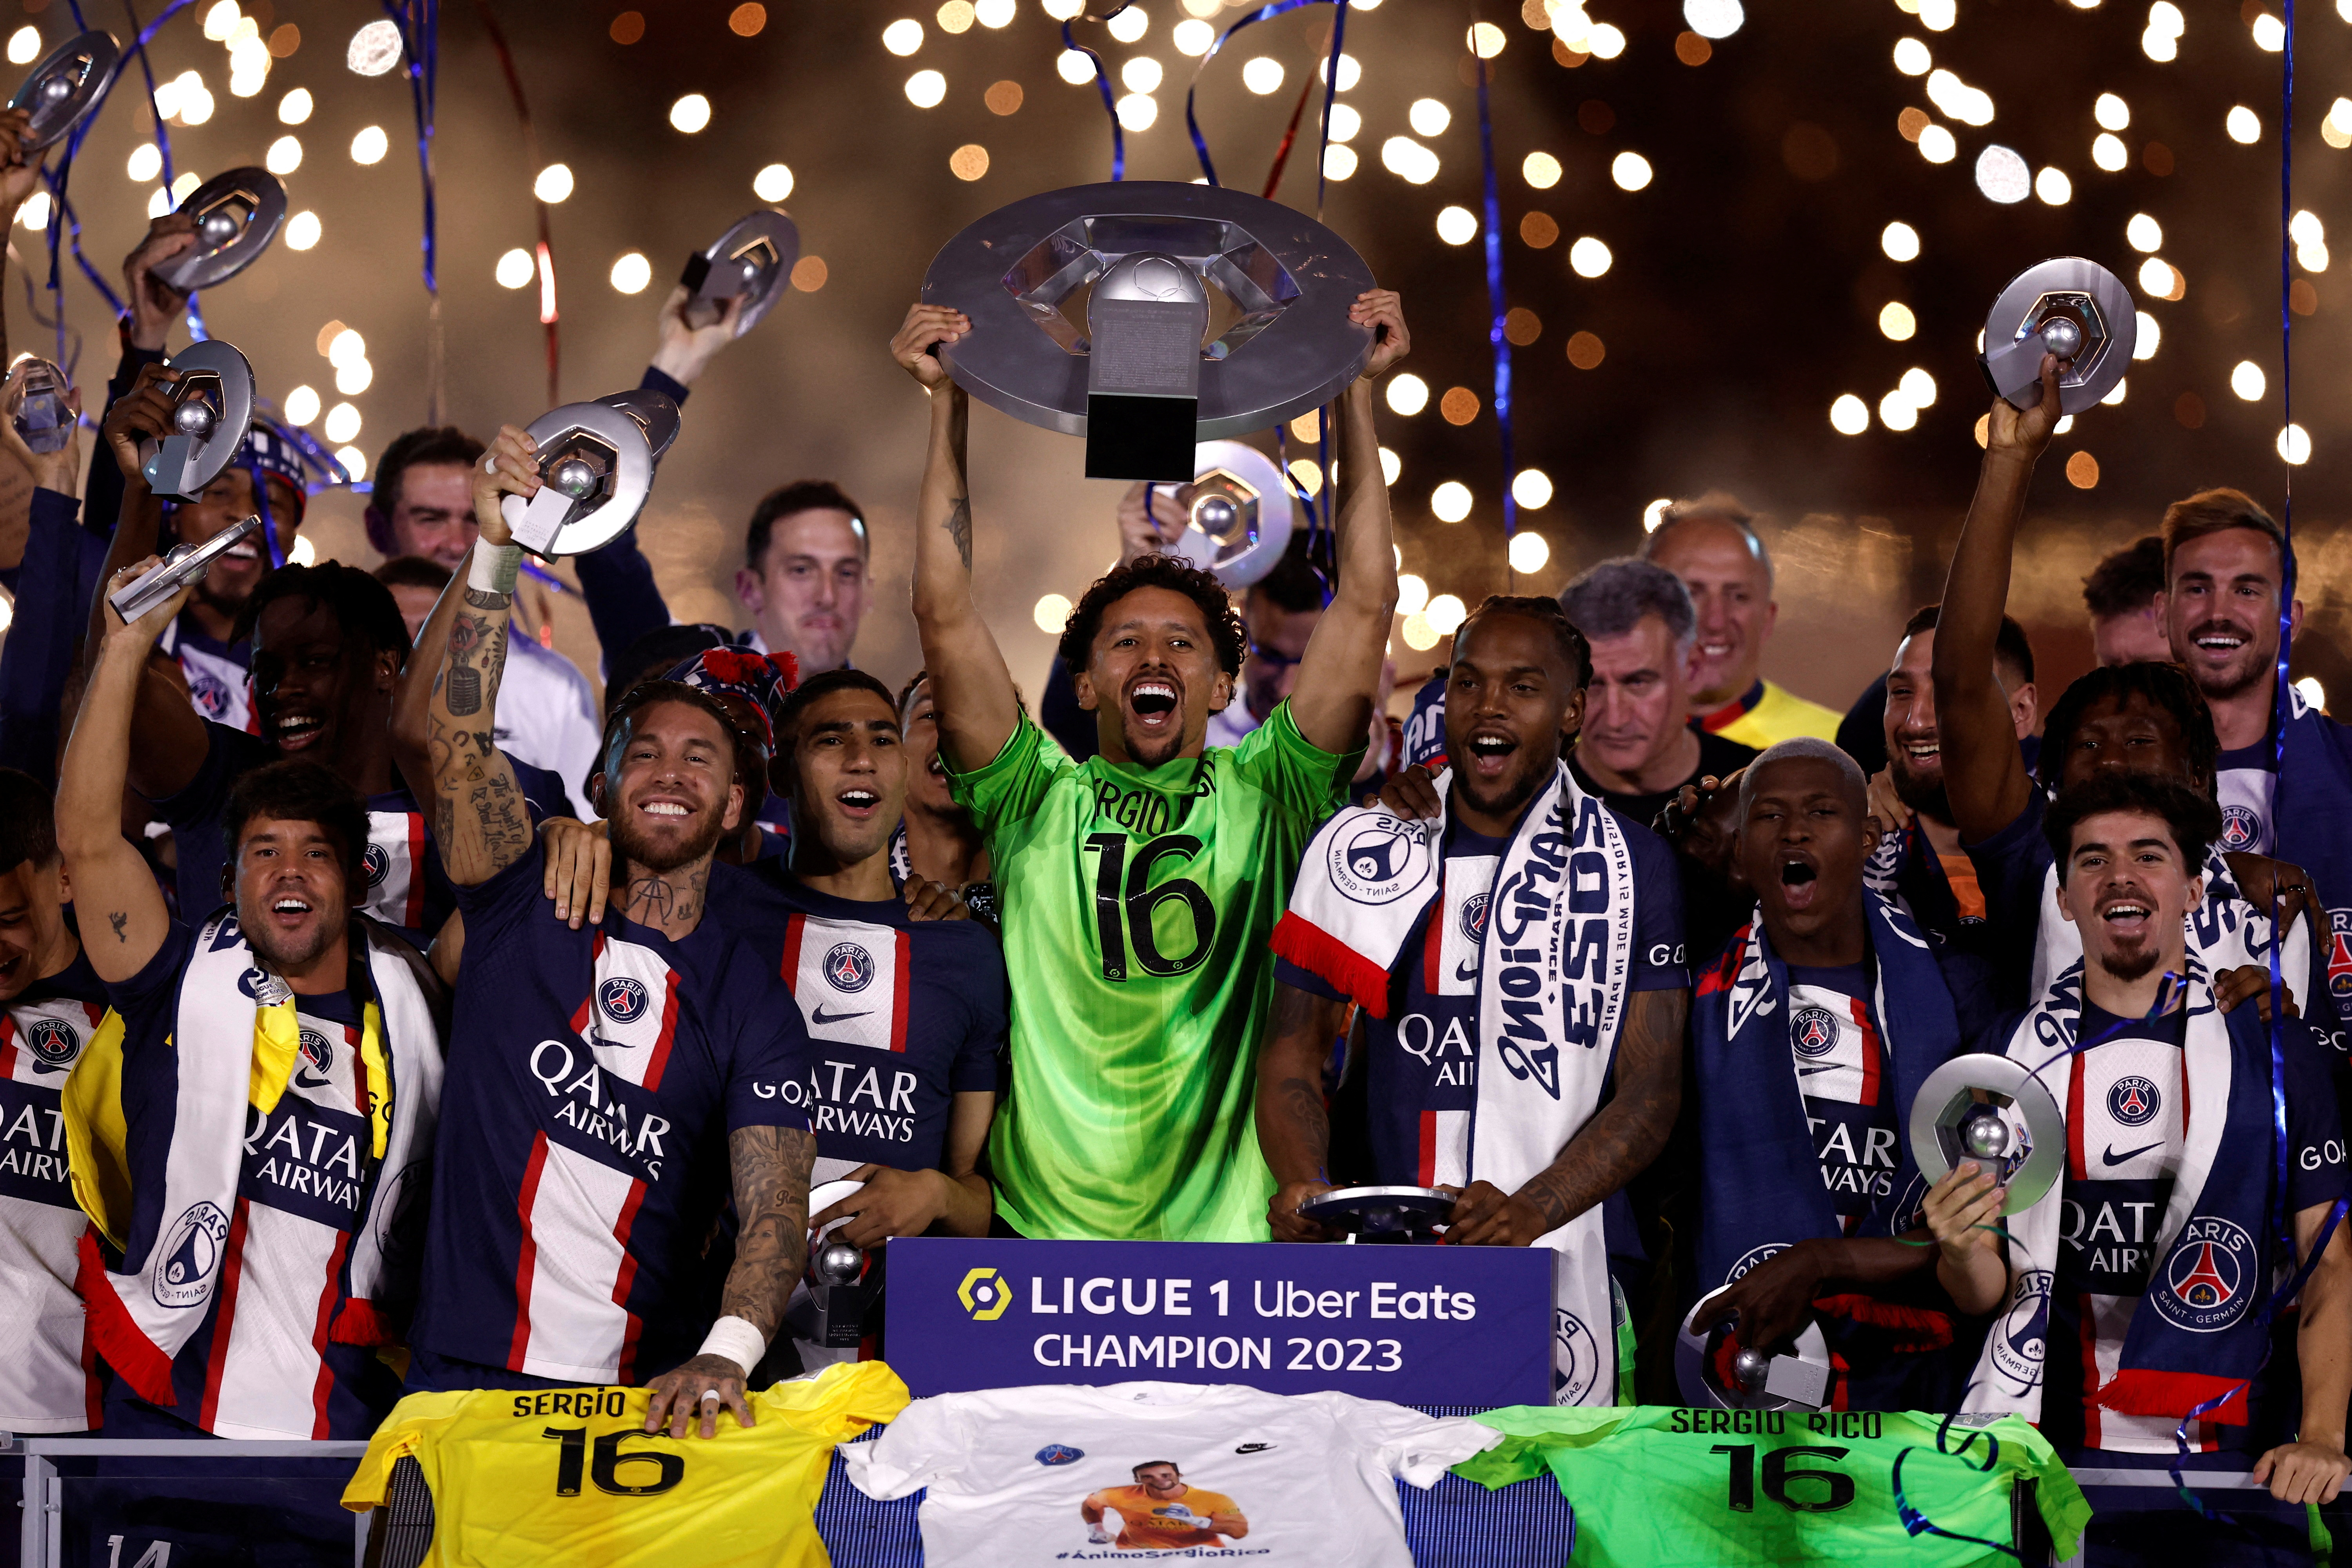 Paris St Germain's Marquinhos and teammates celebrate winning the Ligue 1 with the trophy REUTERS/Benoit Tessier